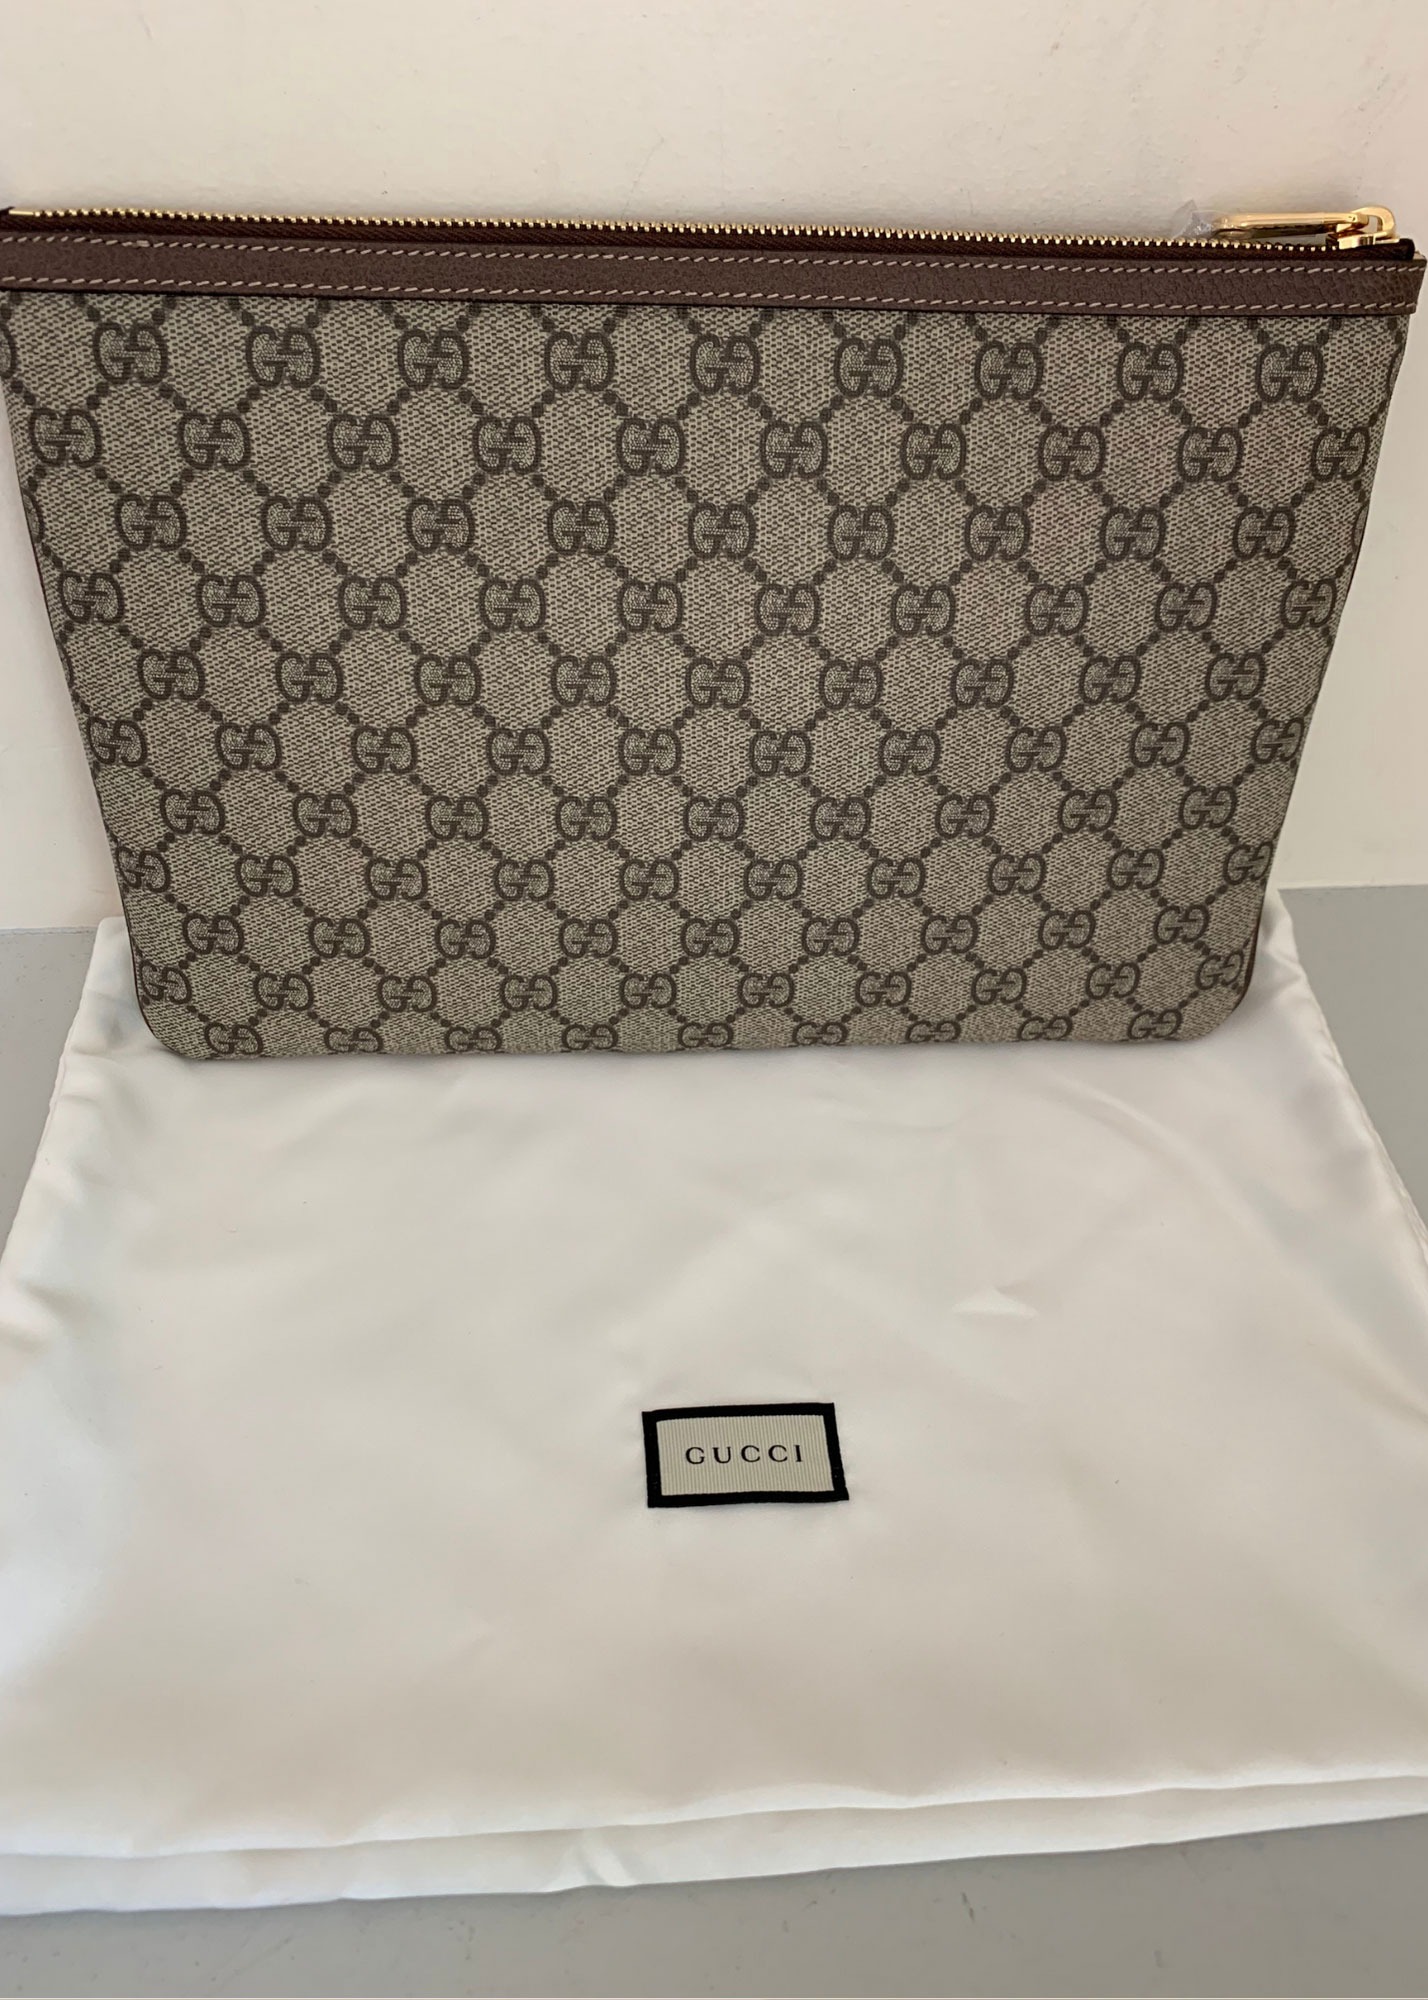 Gucci #574841 Ophidia GG Supreme Zip Top Wristlet Wallet, NWT